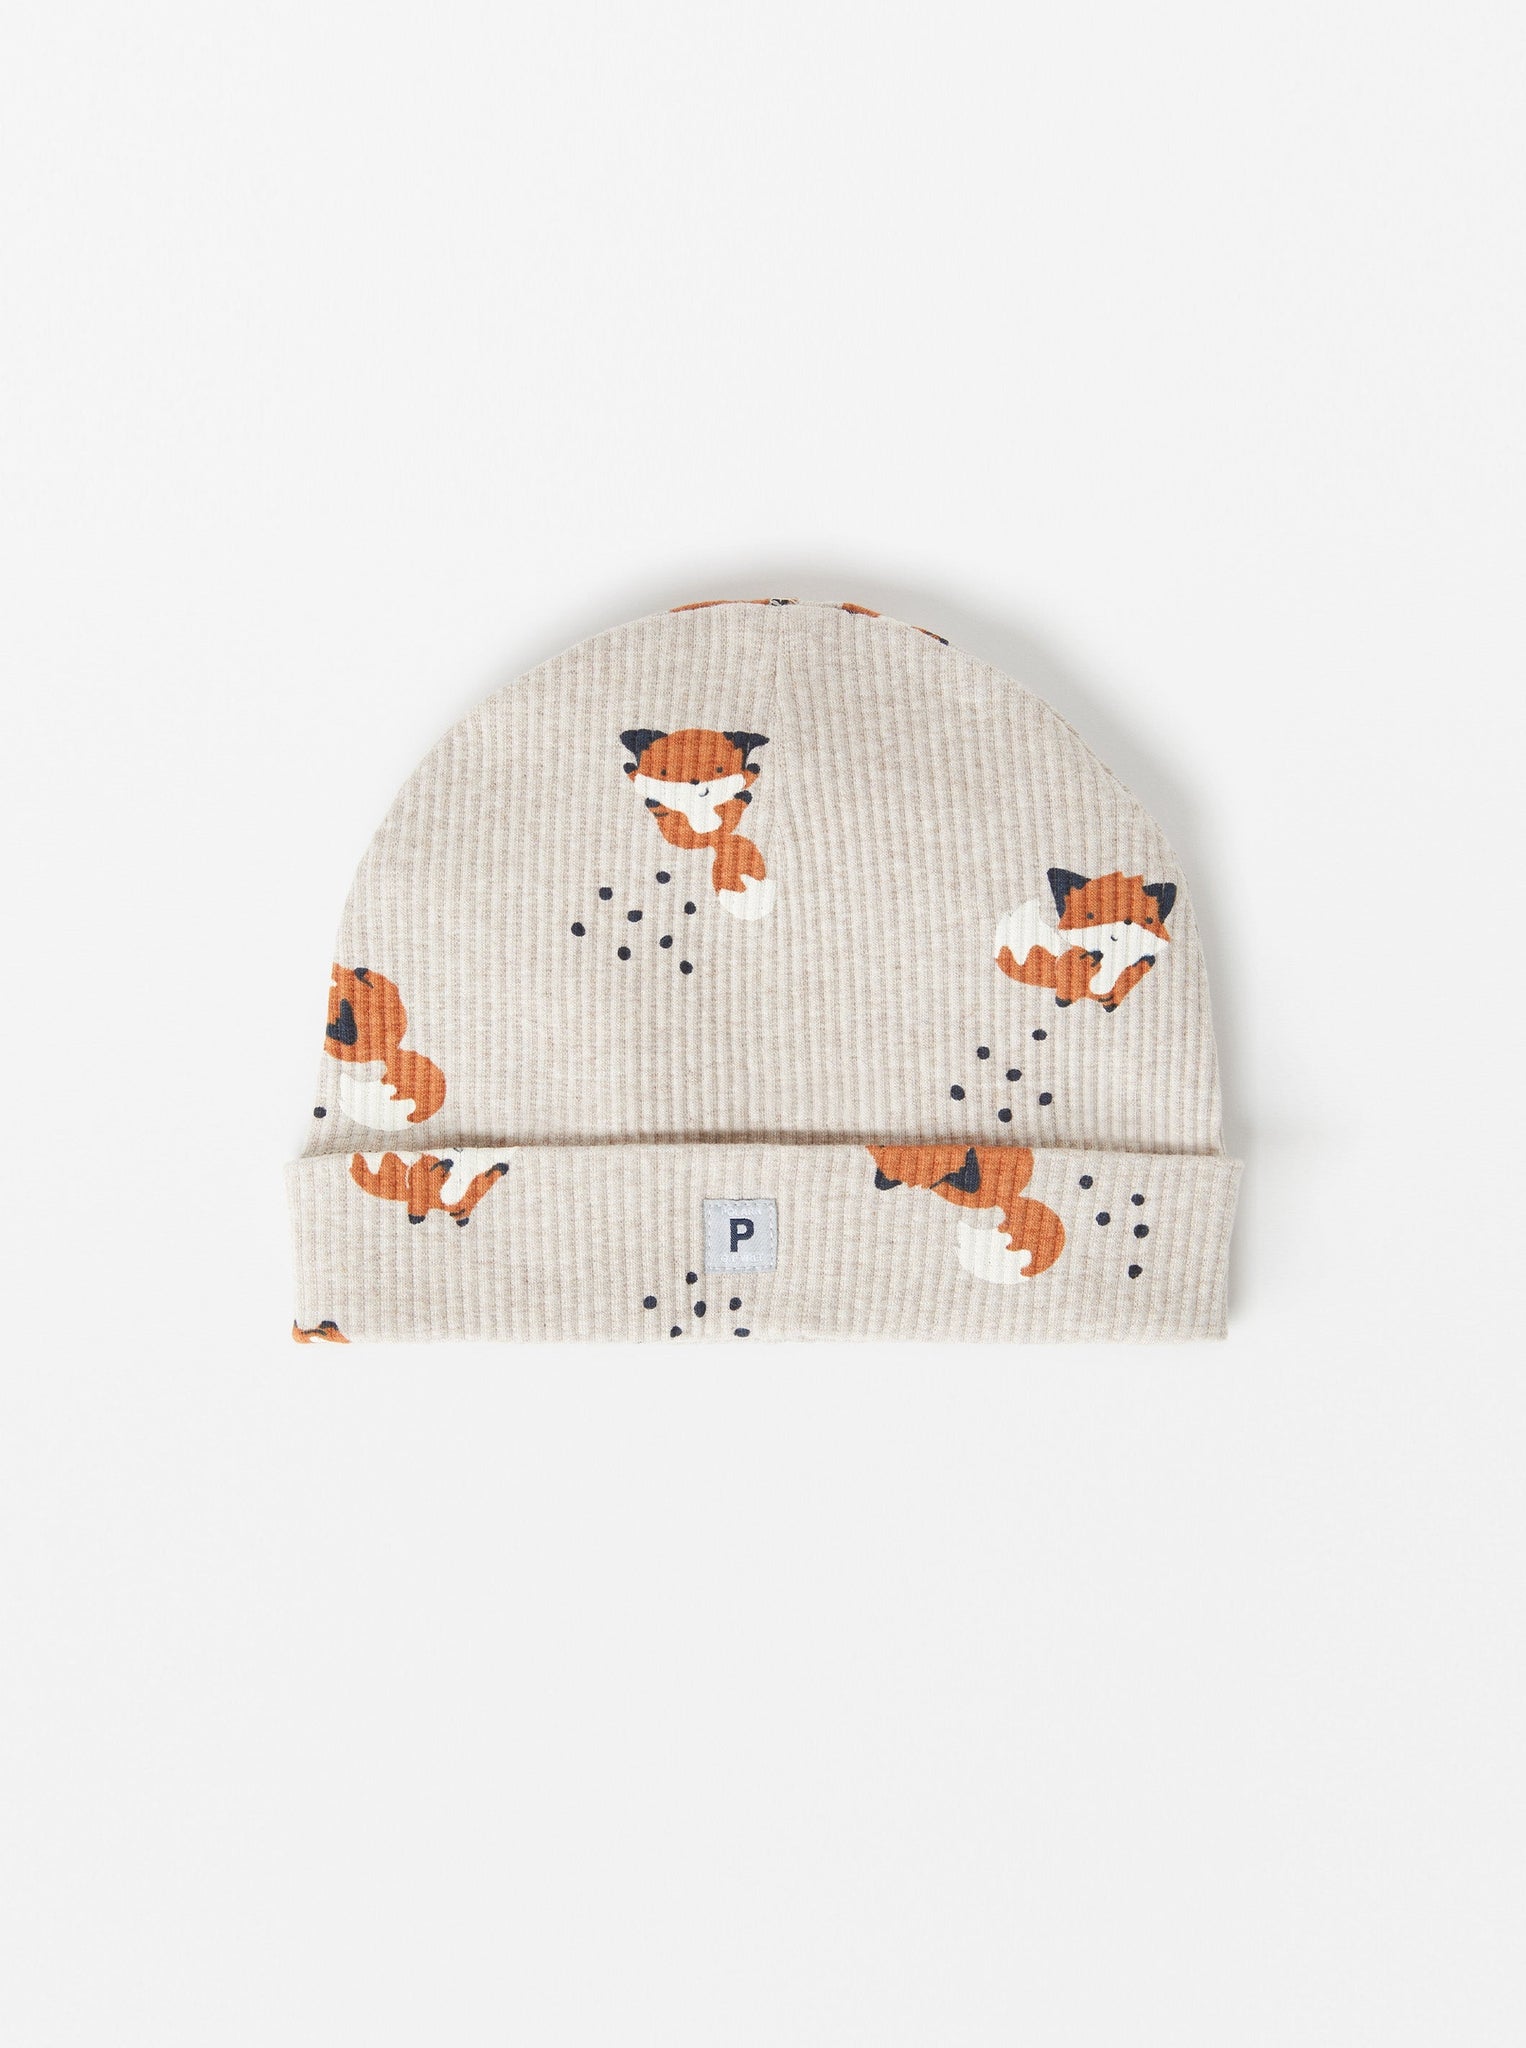 Organic Cotton White Baby Hat from the Polarn O. Pyret babywear collection. Clothes made using sustainably sourced materials.